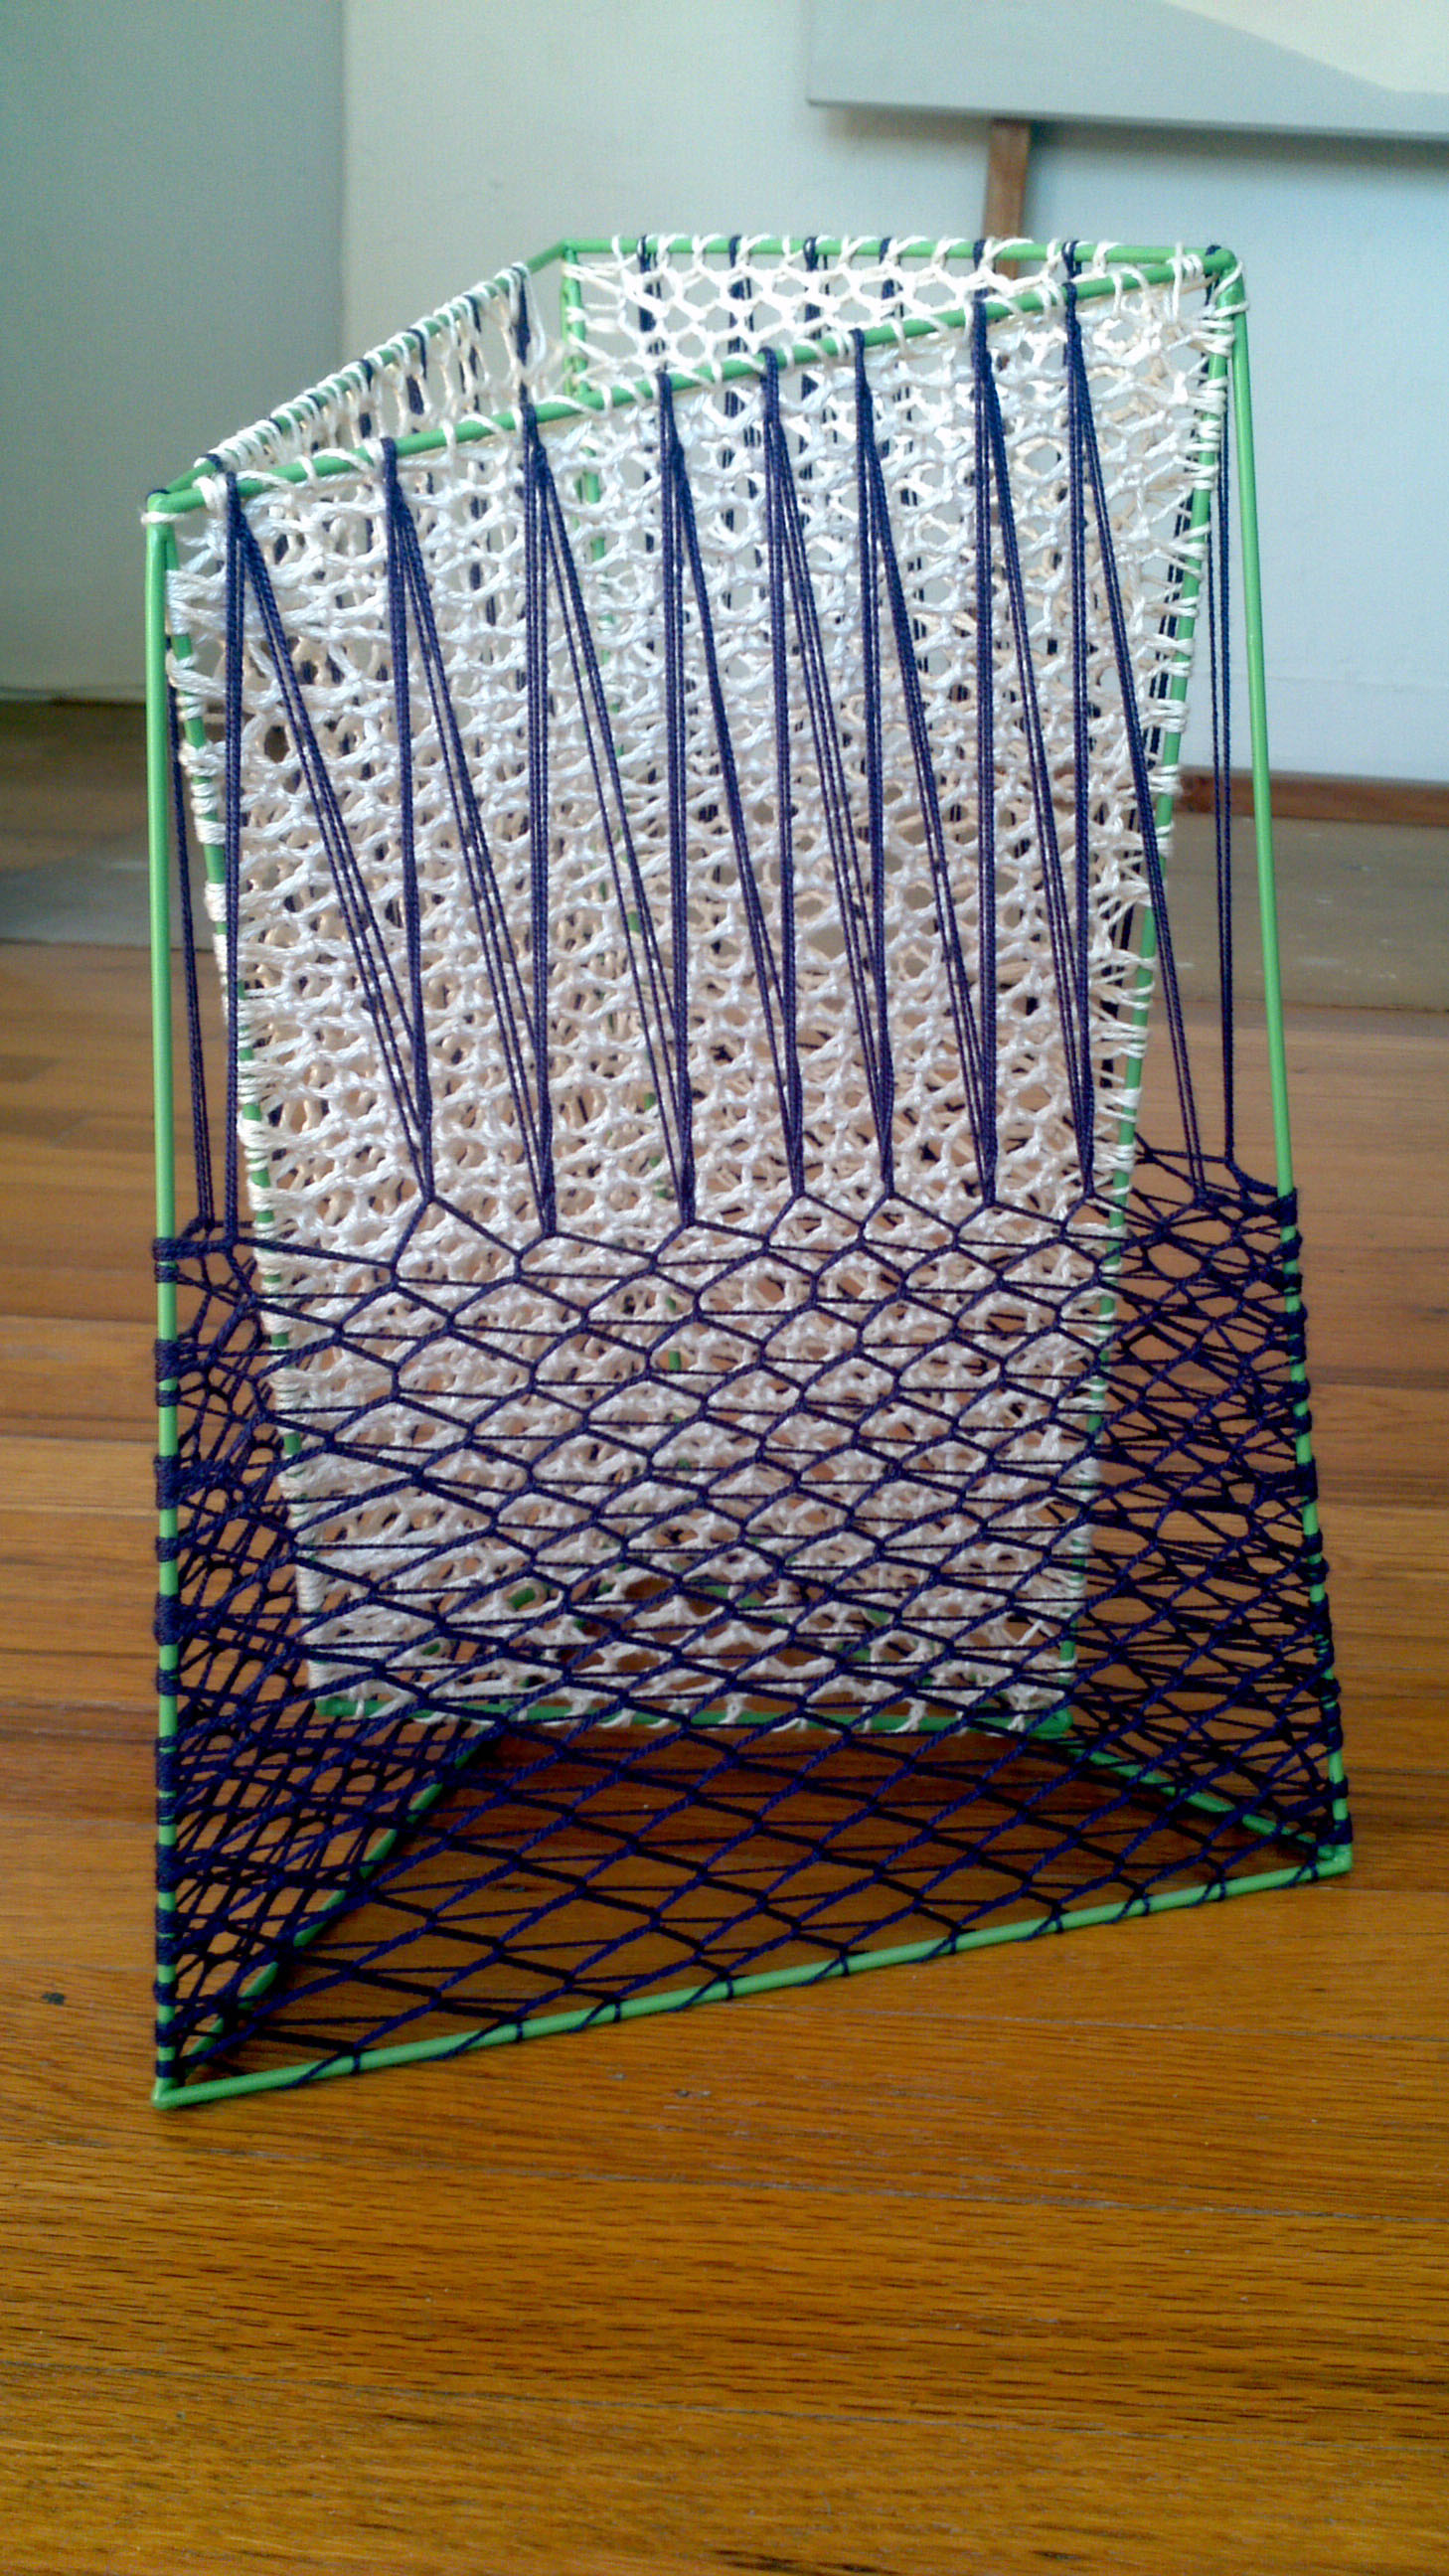   Ashley Landrum    1917    steel, string, paint   11 x 9 x14 Inches  Courtesy of the Artist 